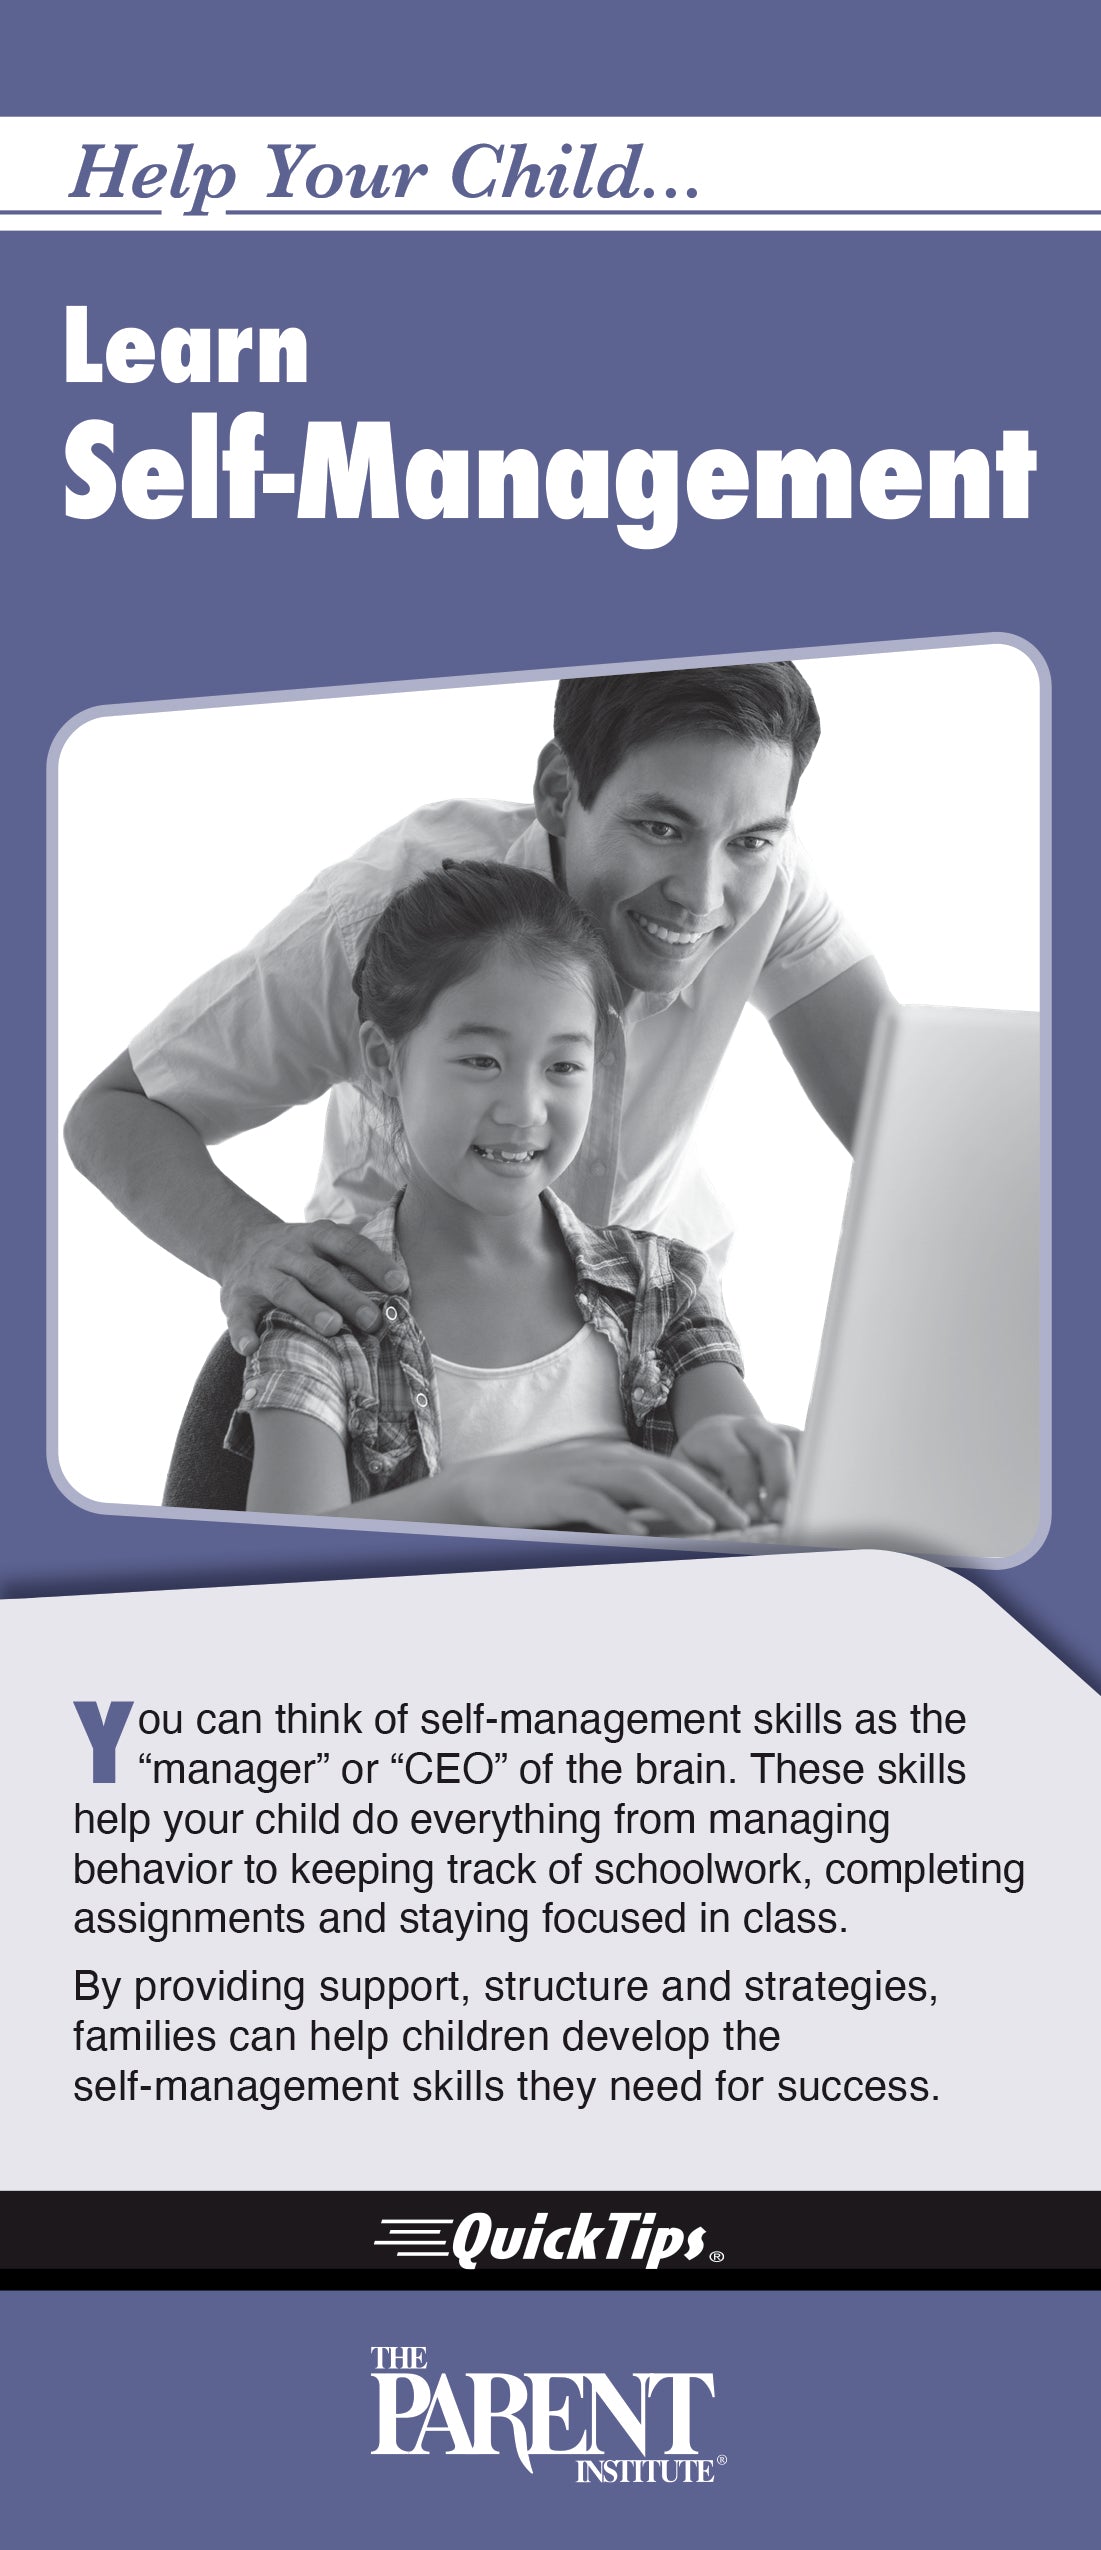 Help Your Child Learn Self-Management